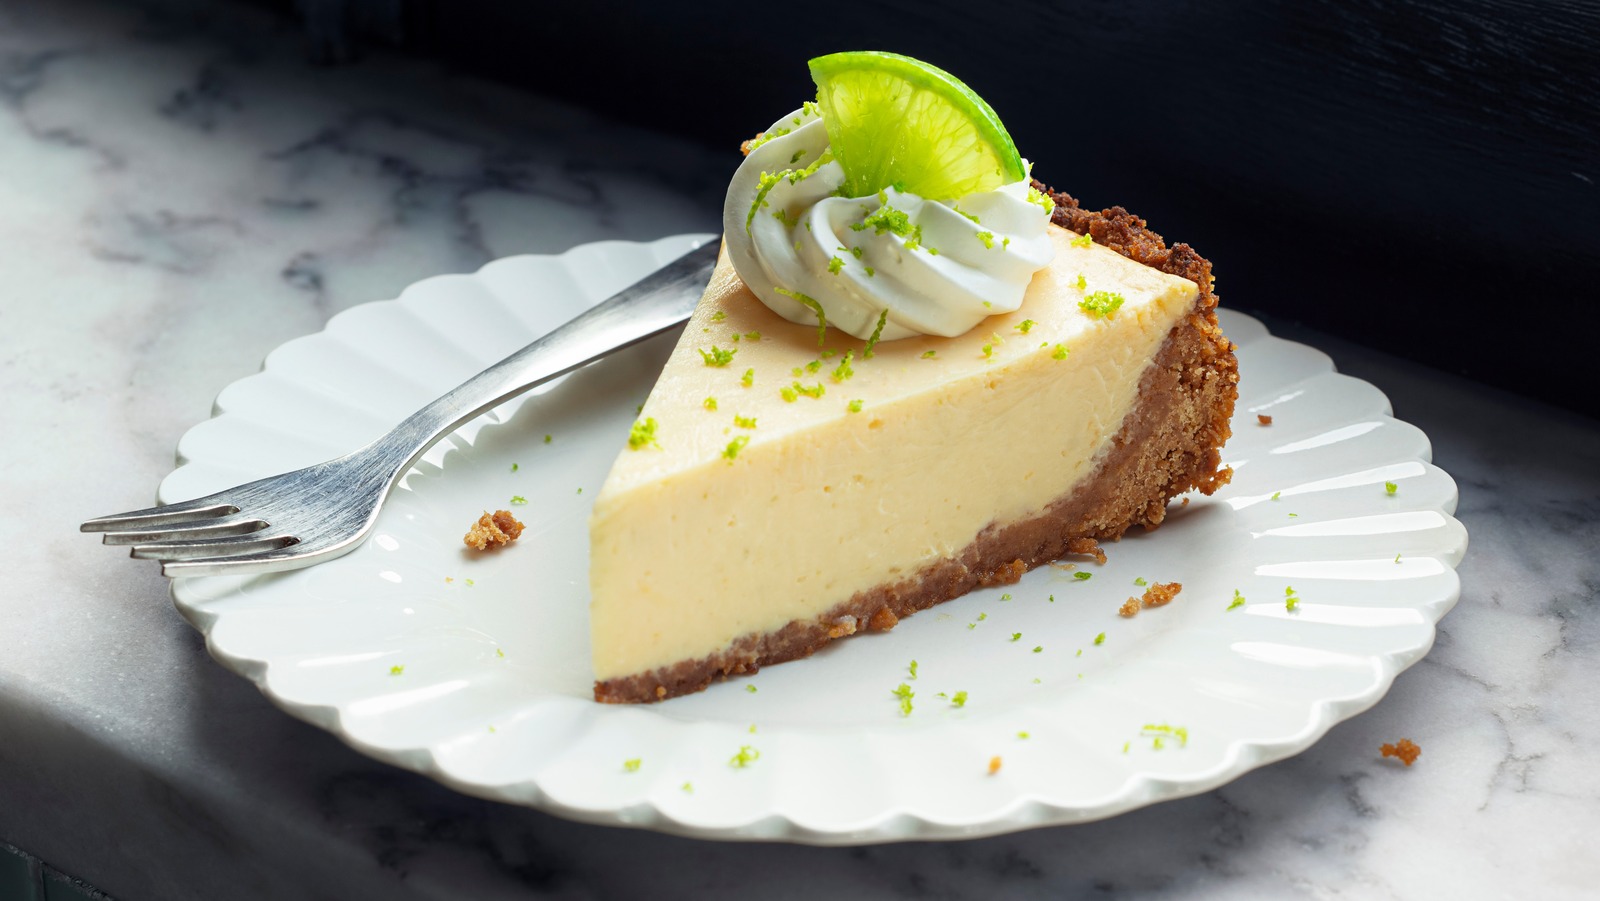 Steal Publix's Crust Topping for the Best Key Lime Pie